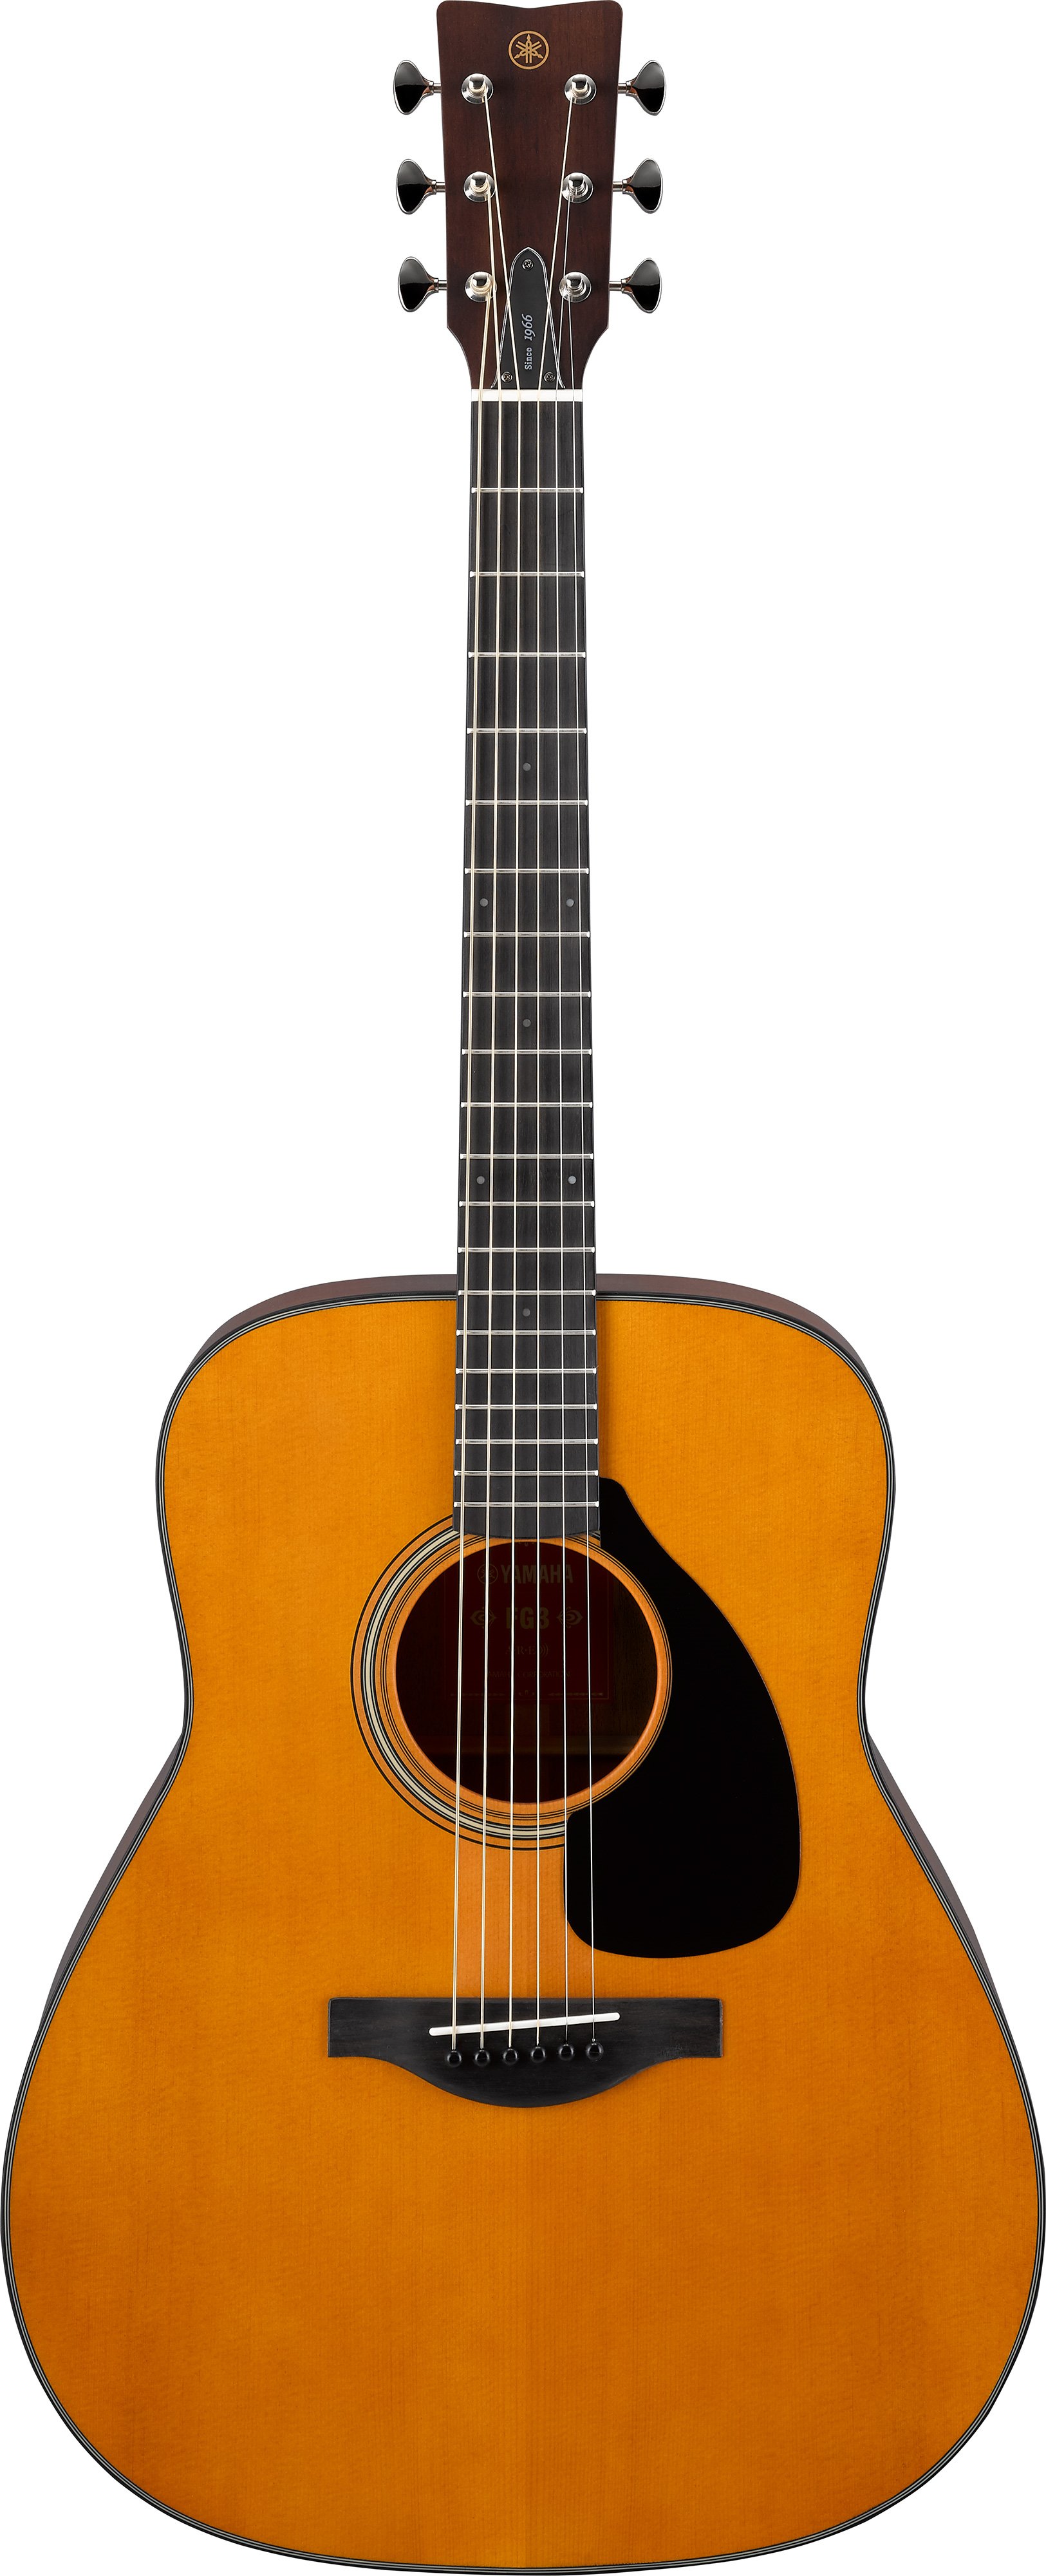 FG/FS Red Label - Overview - FG Series - Acoustic Guitars 